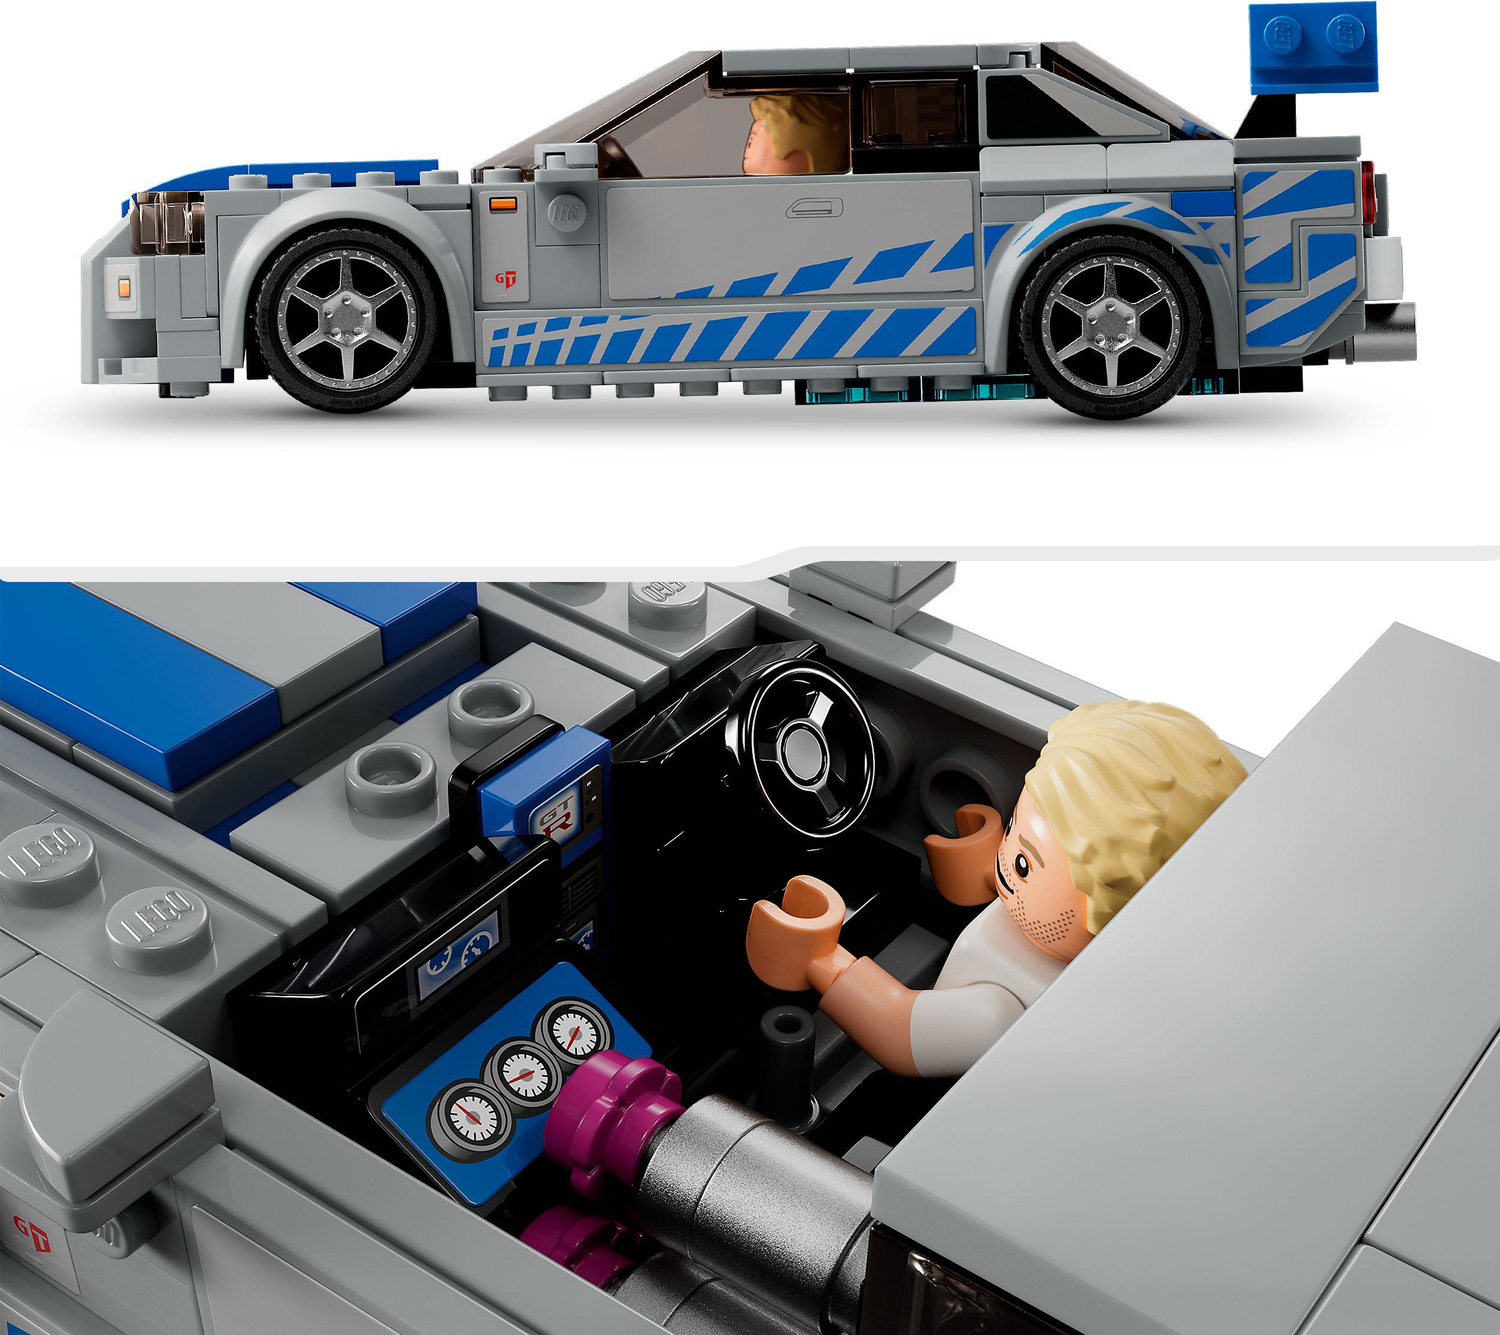 LEGO 76917 2 Fast 2 Furious Nissan Skyline GT-R (R34) - NEW AND SHIPS FAST  673419378666